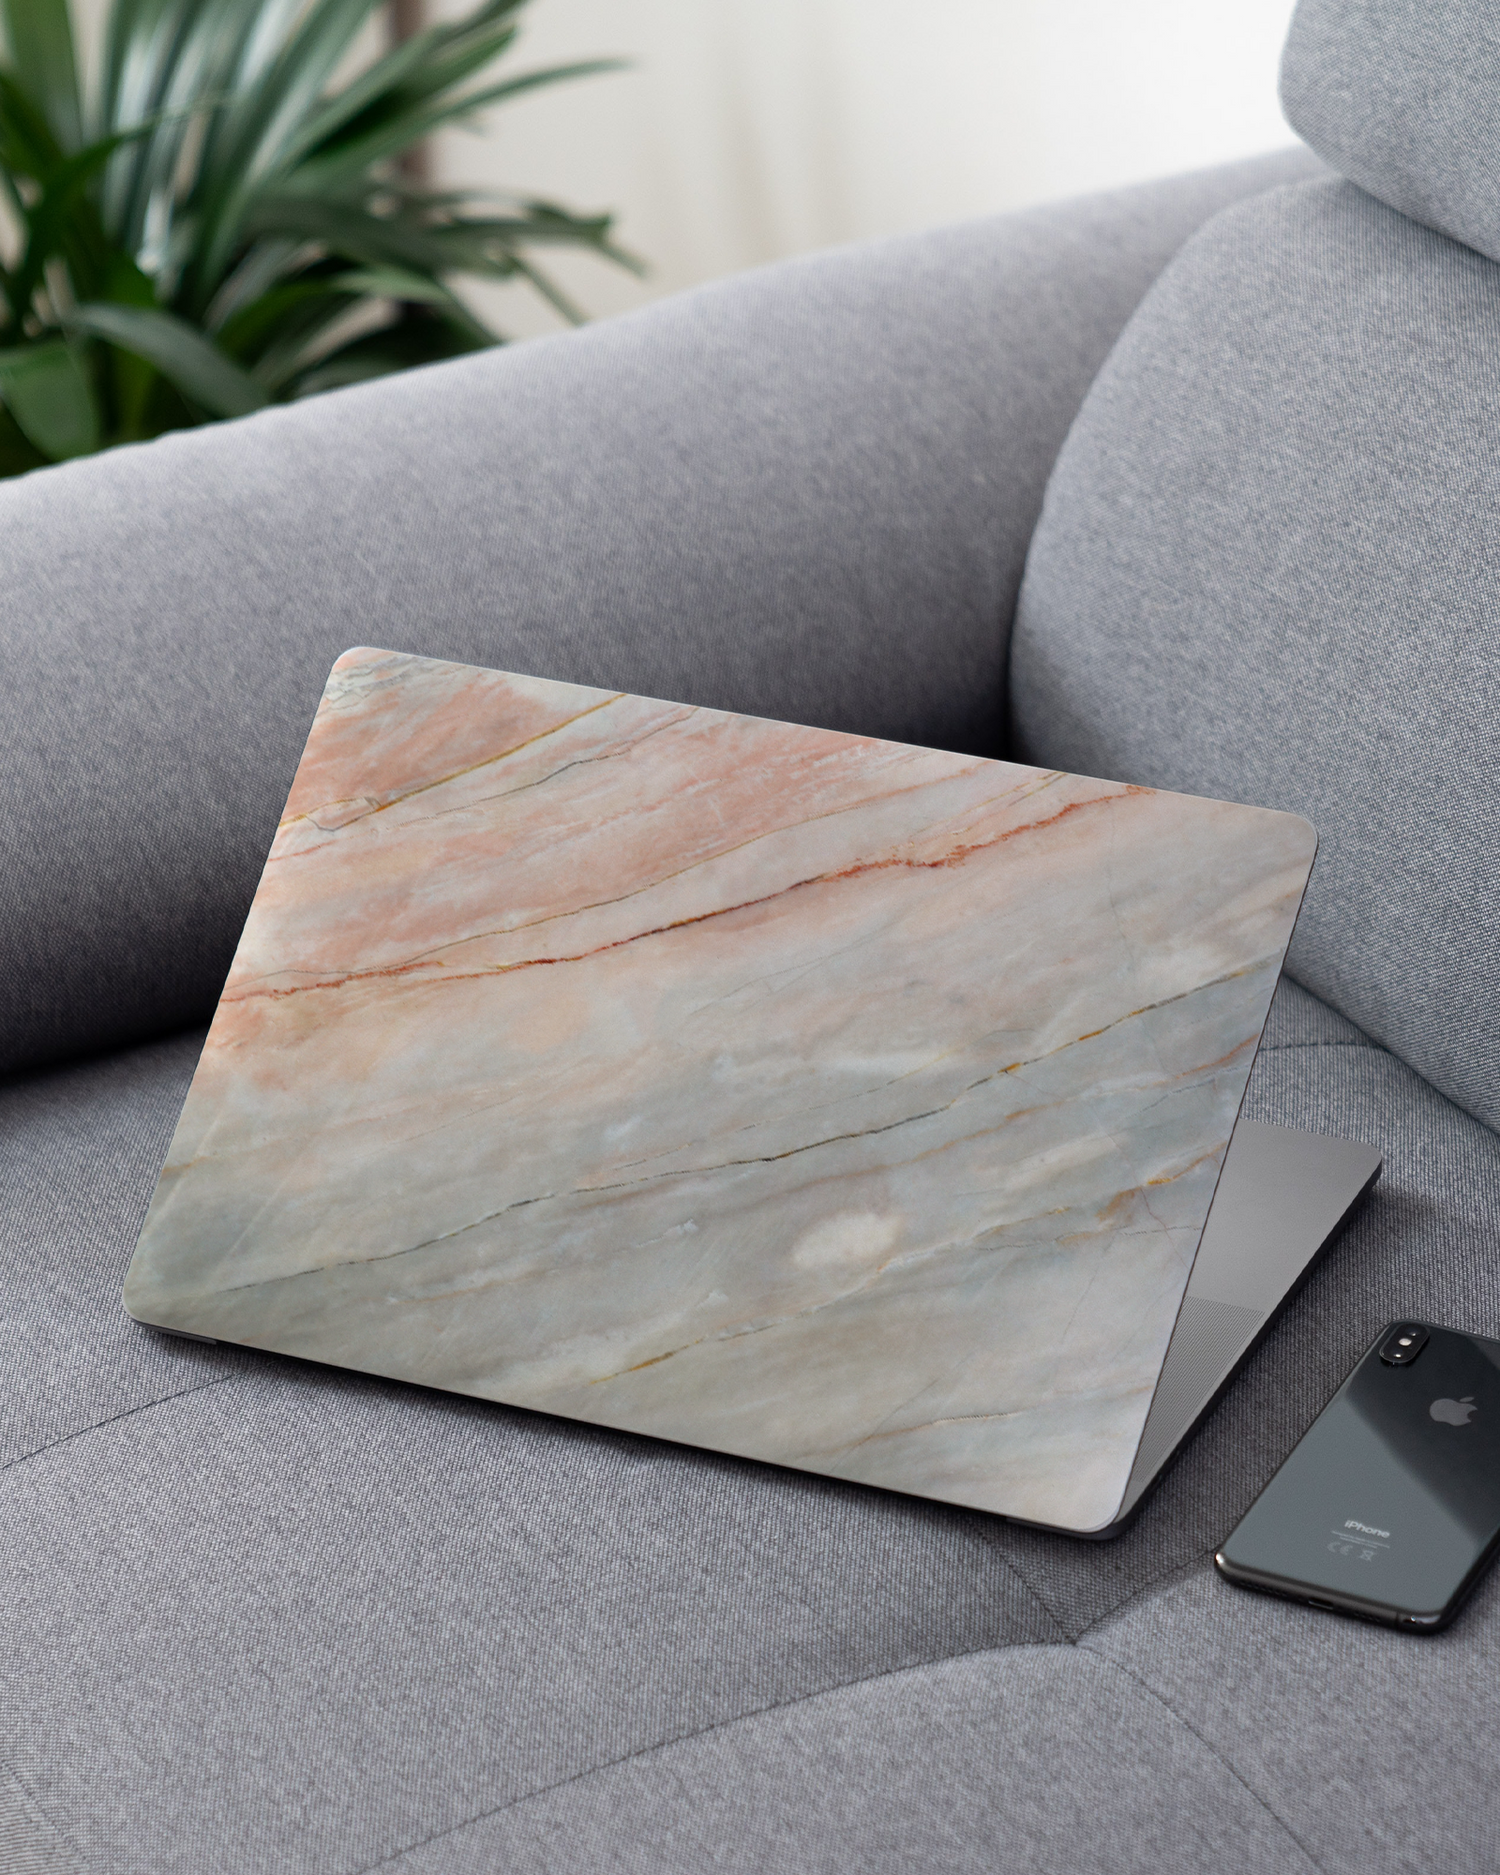 Mother of Pearl Marble Laptop Skin for 13 inch Apple MacBooks on a couch